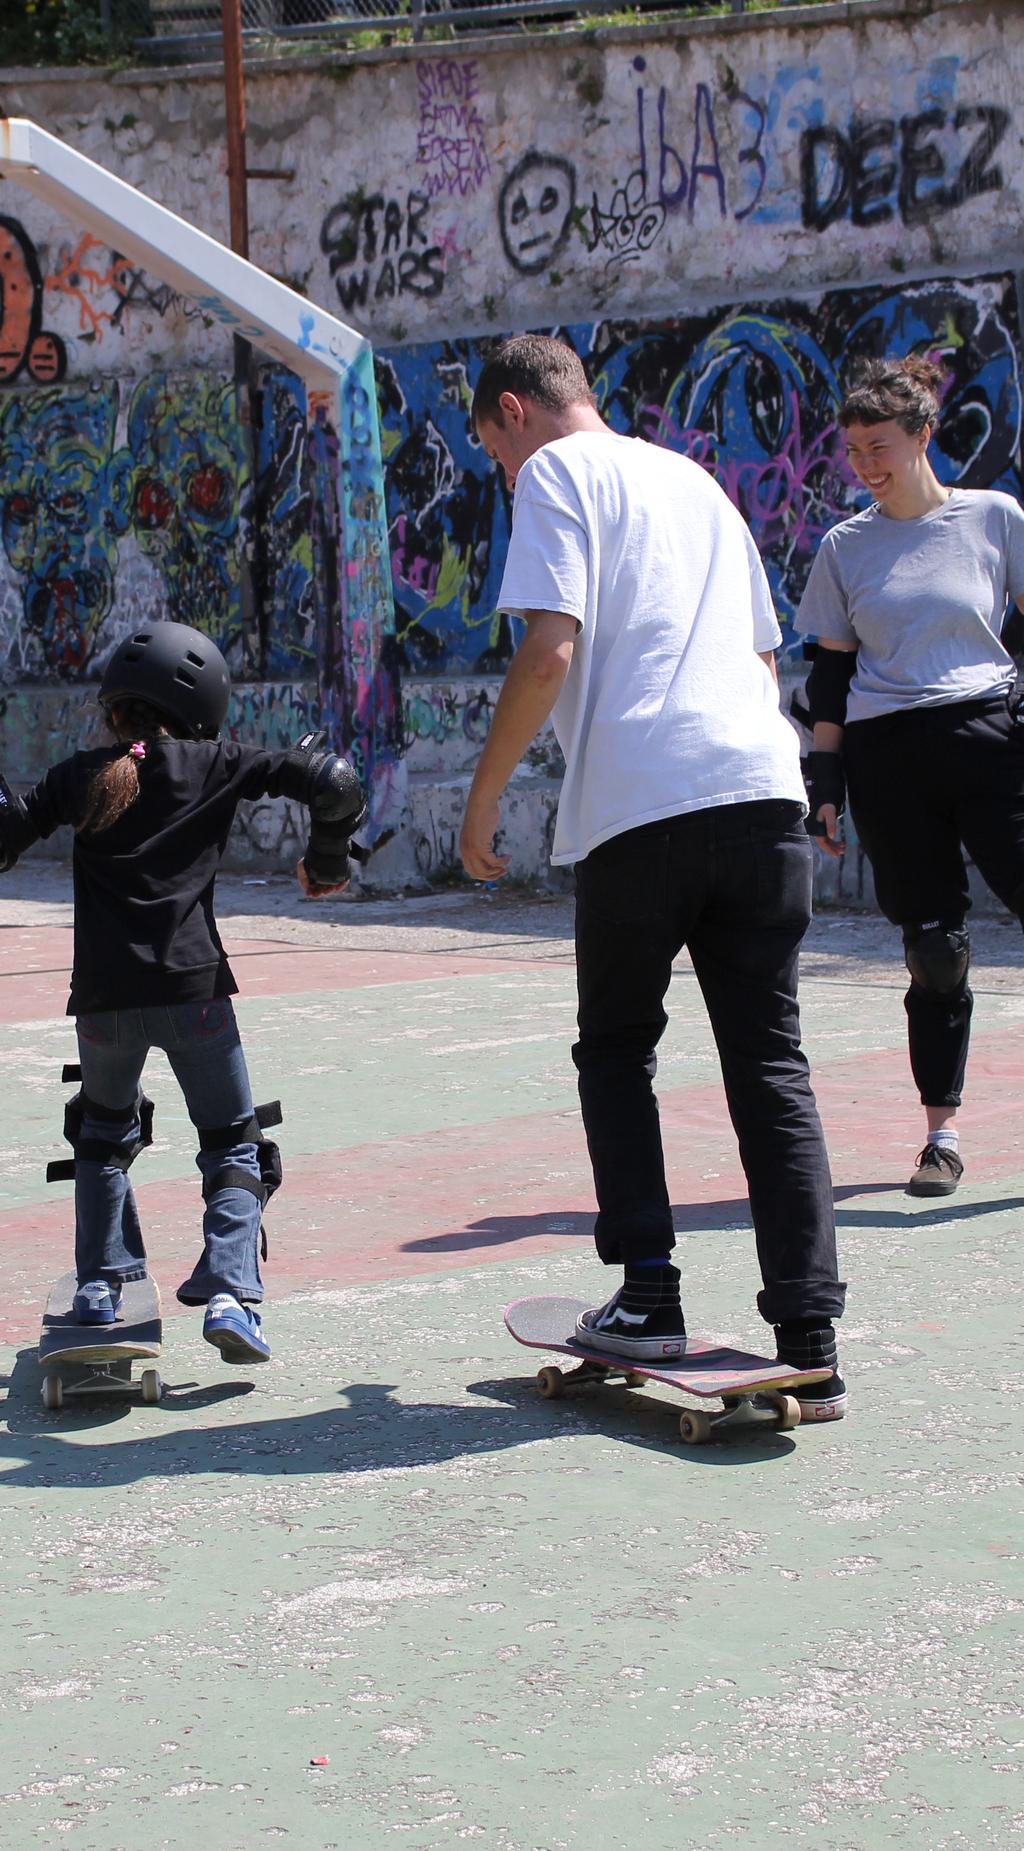 Gender Equality Skateboarding is for everyone. We promote female participation in our sessions by promoting skateboarding as a mixed activity, using female instructors and offering all women sessions.